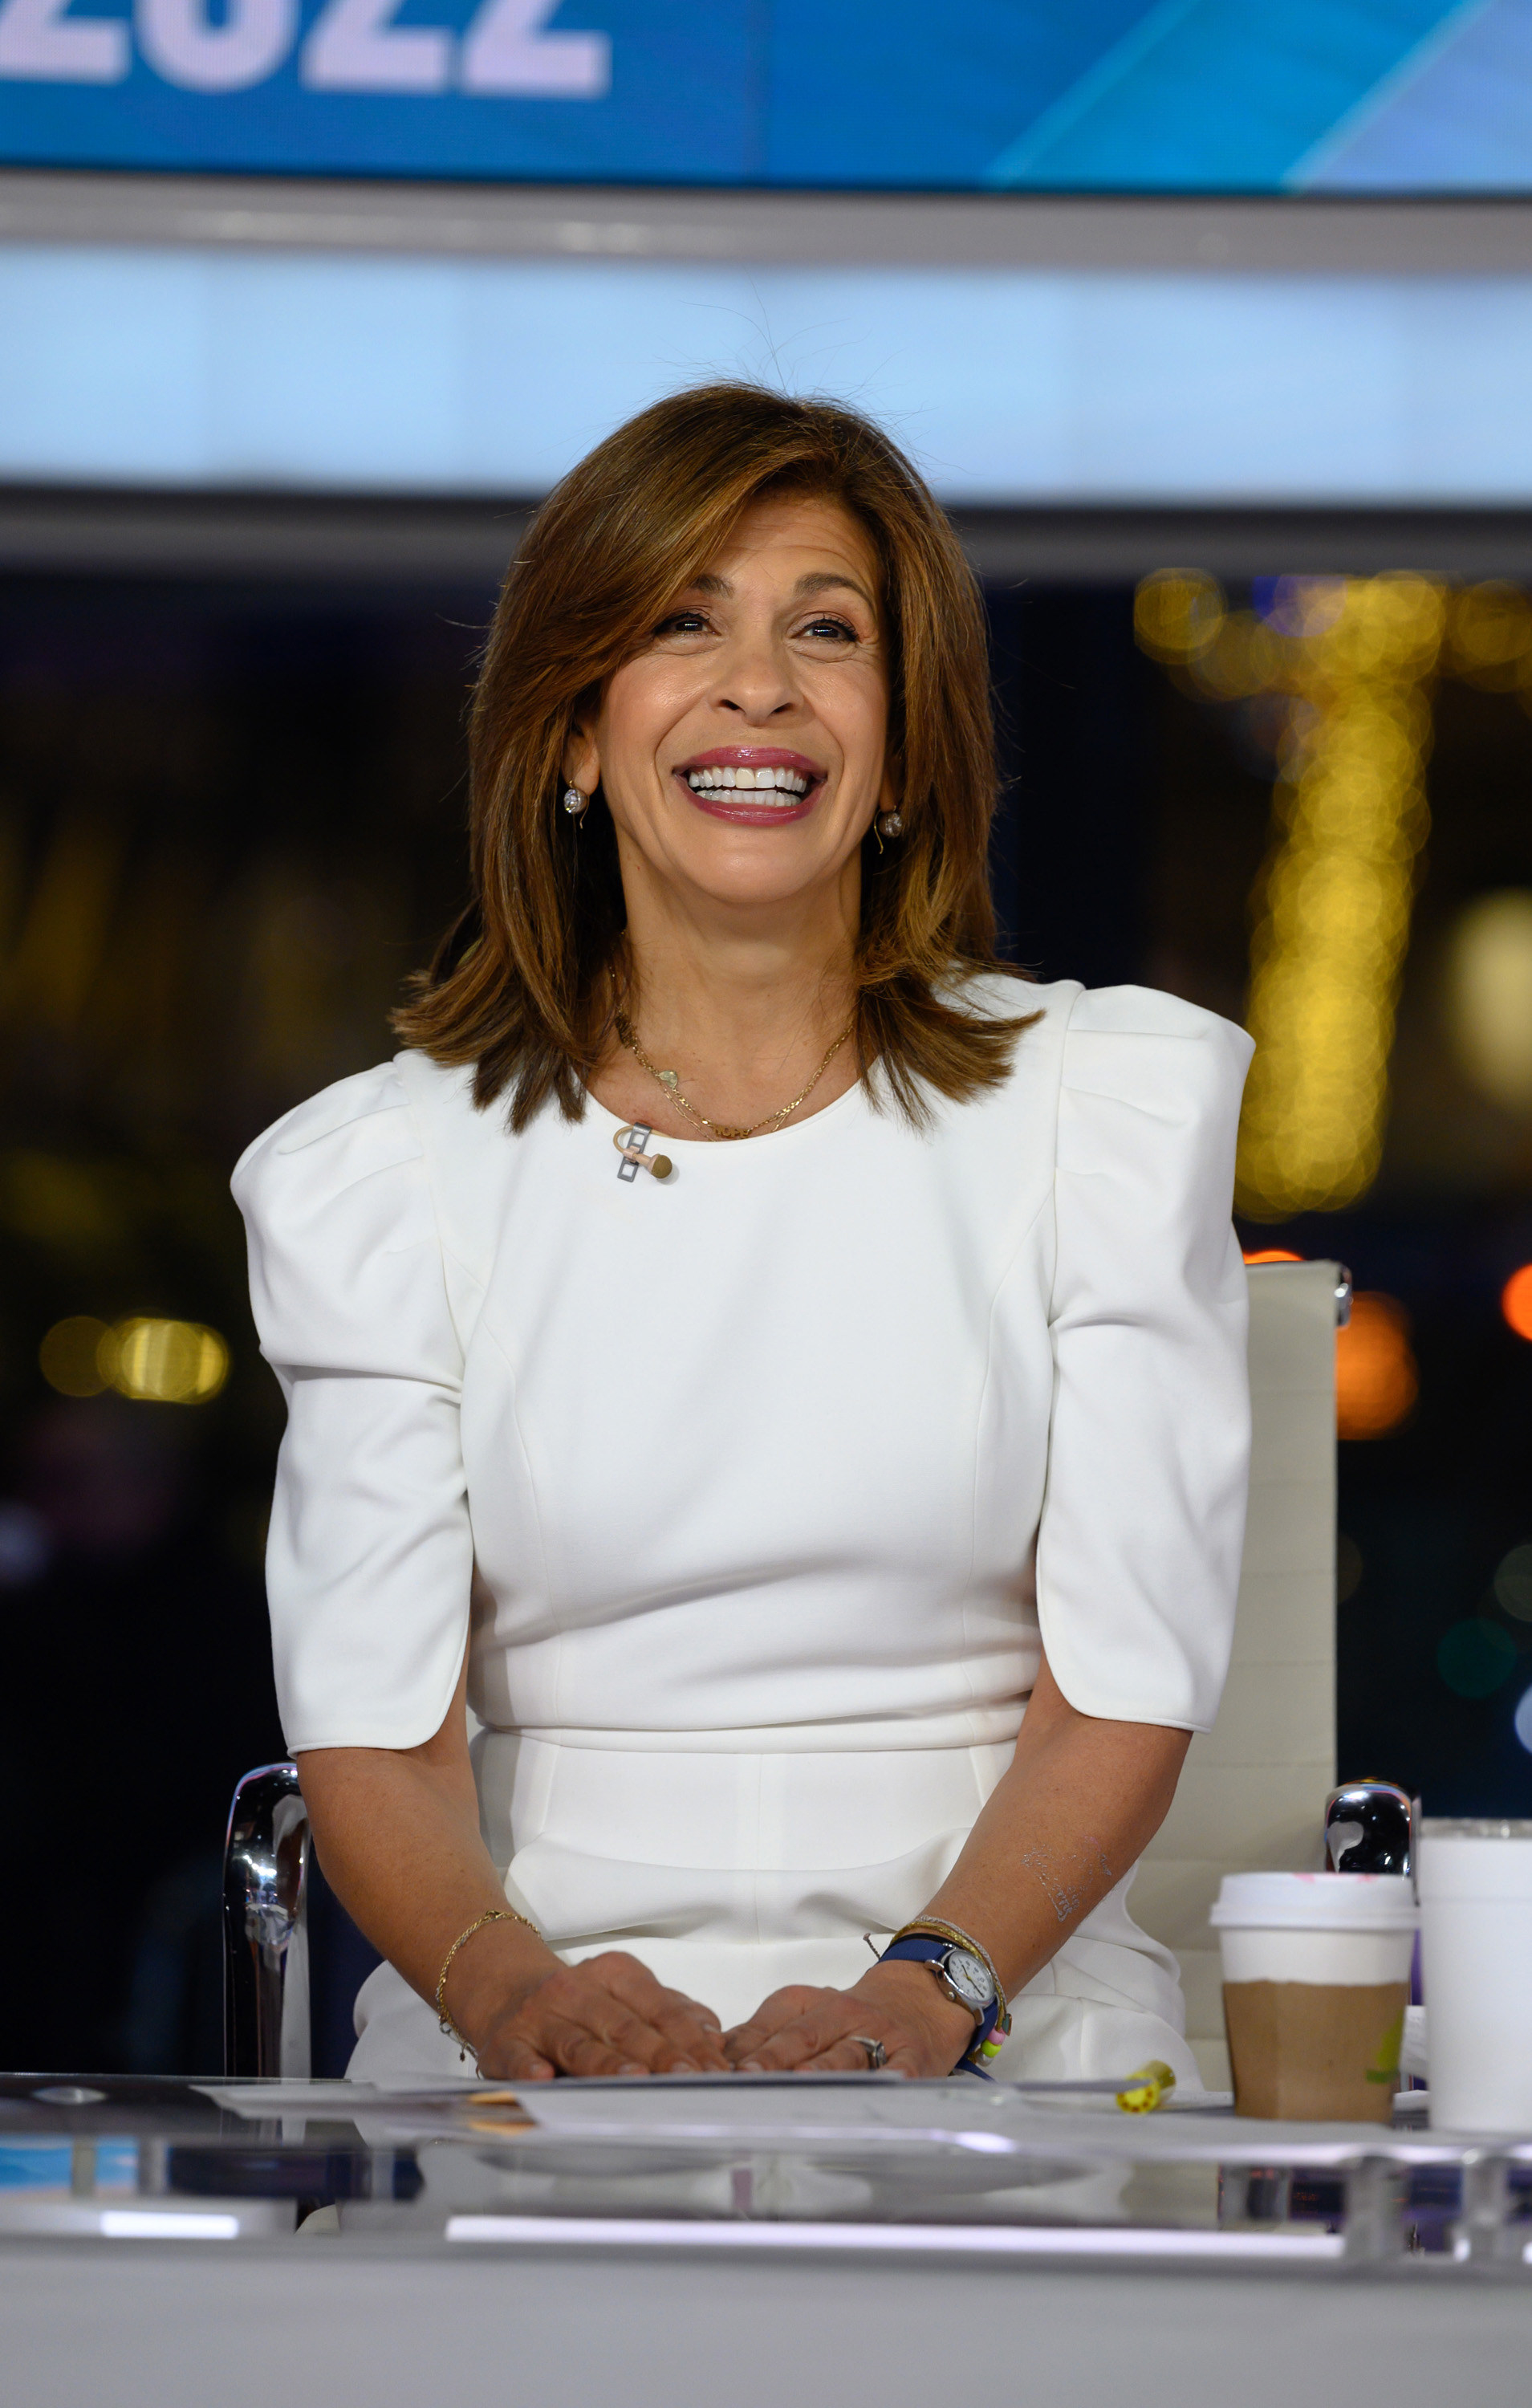 Hoda Kotb is photographed while filming for the &quot;Today&quot; show on January 14, 2022